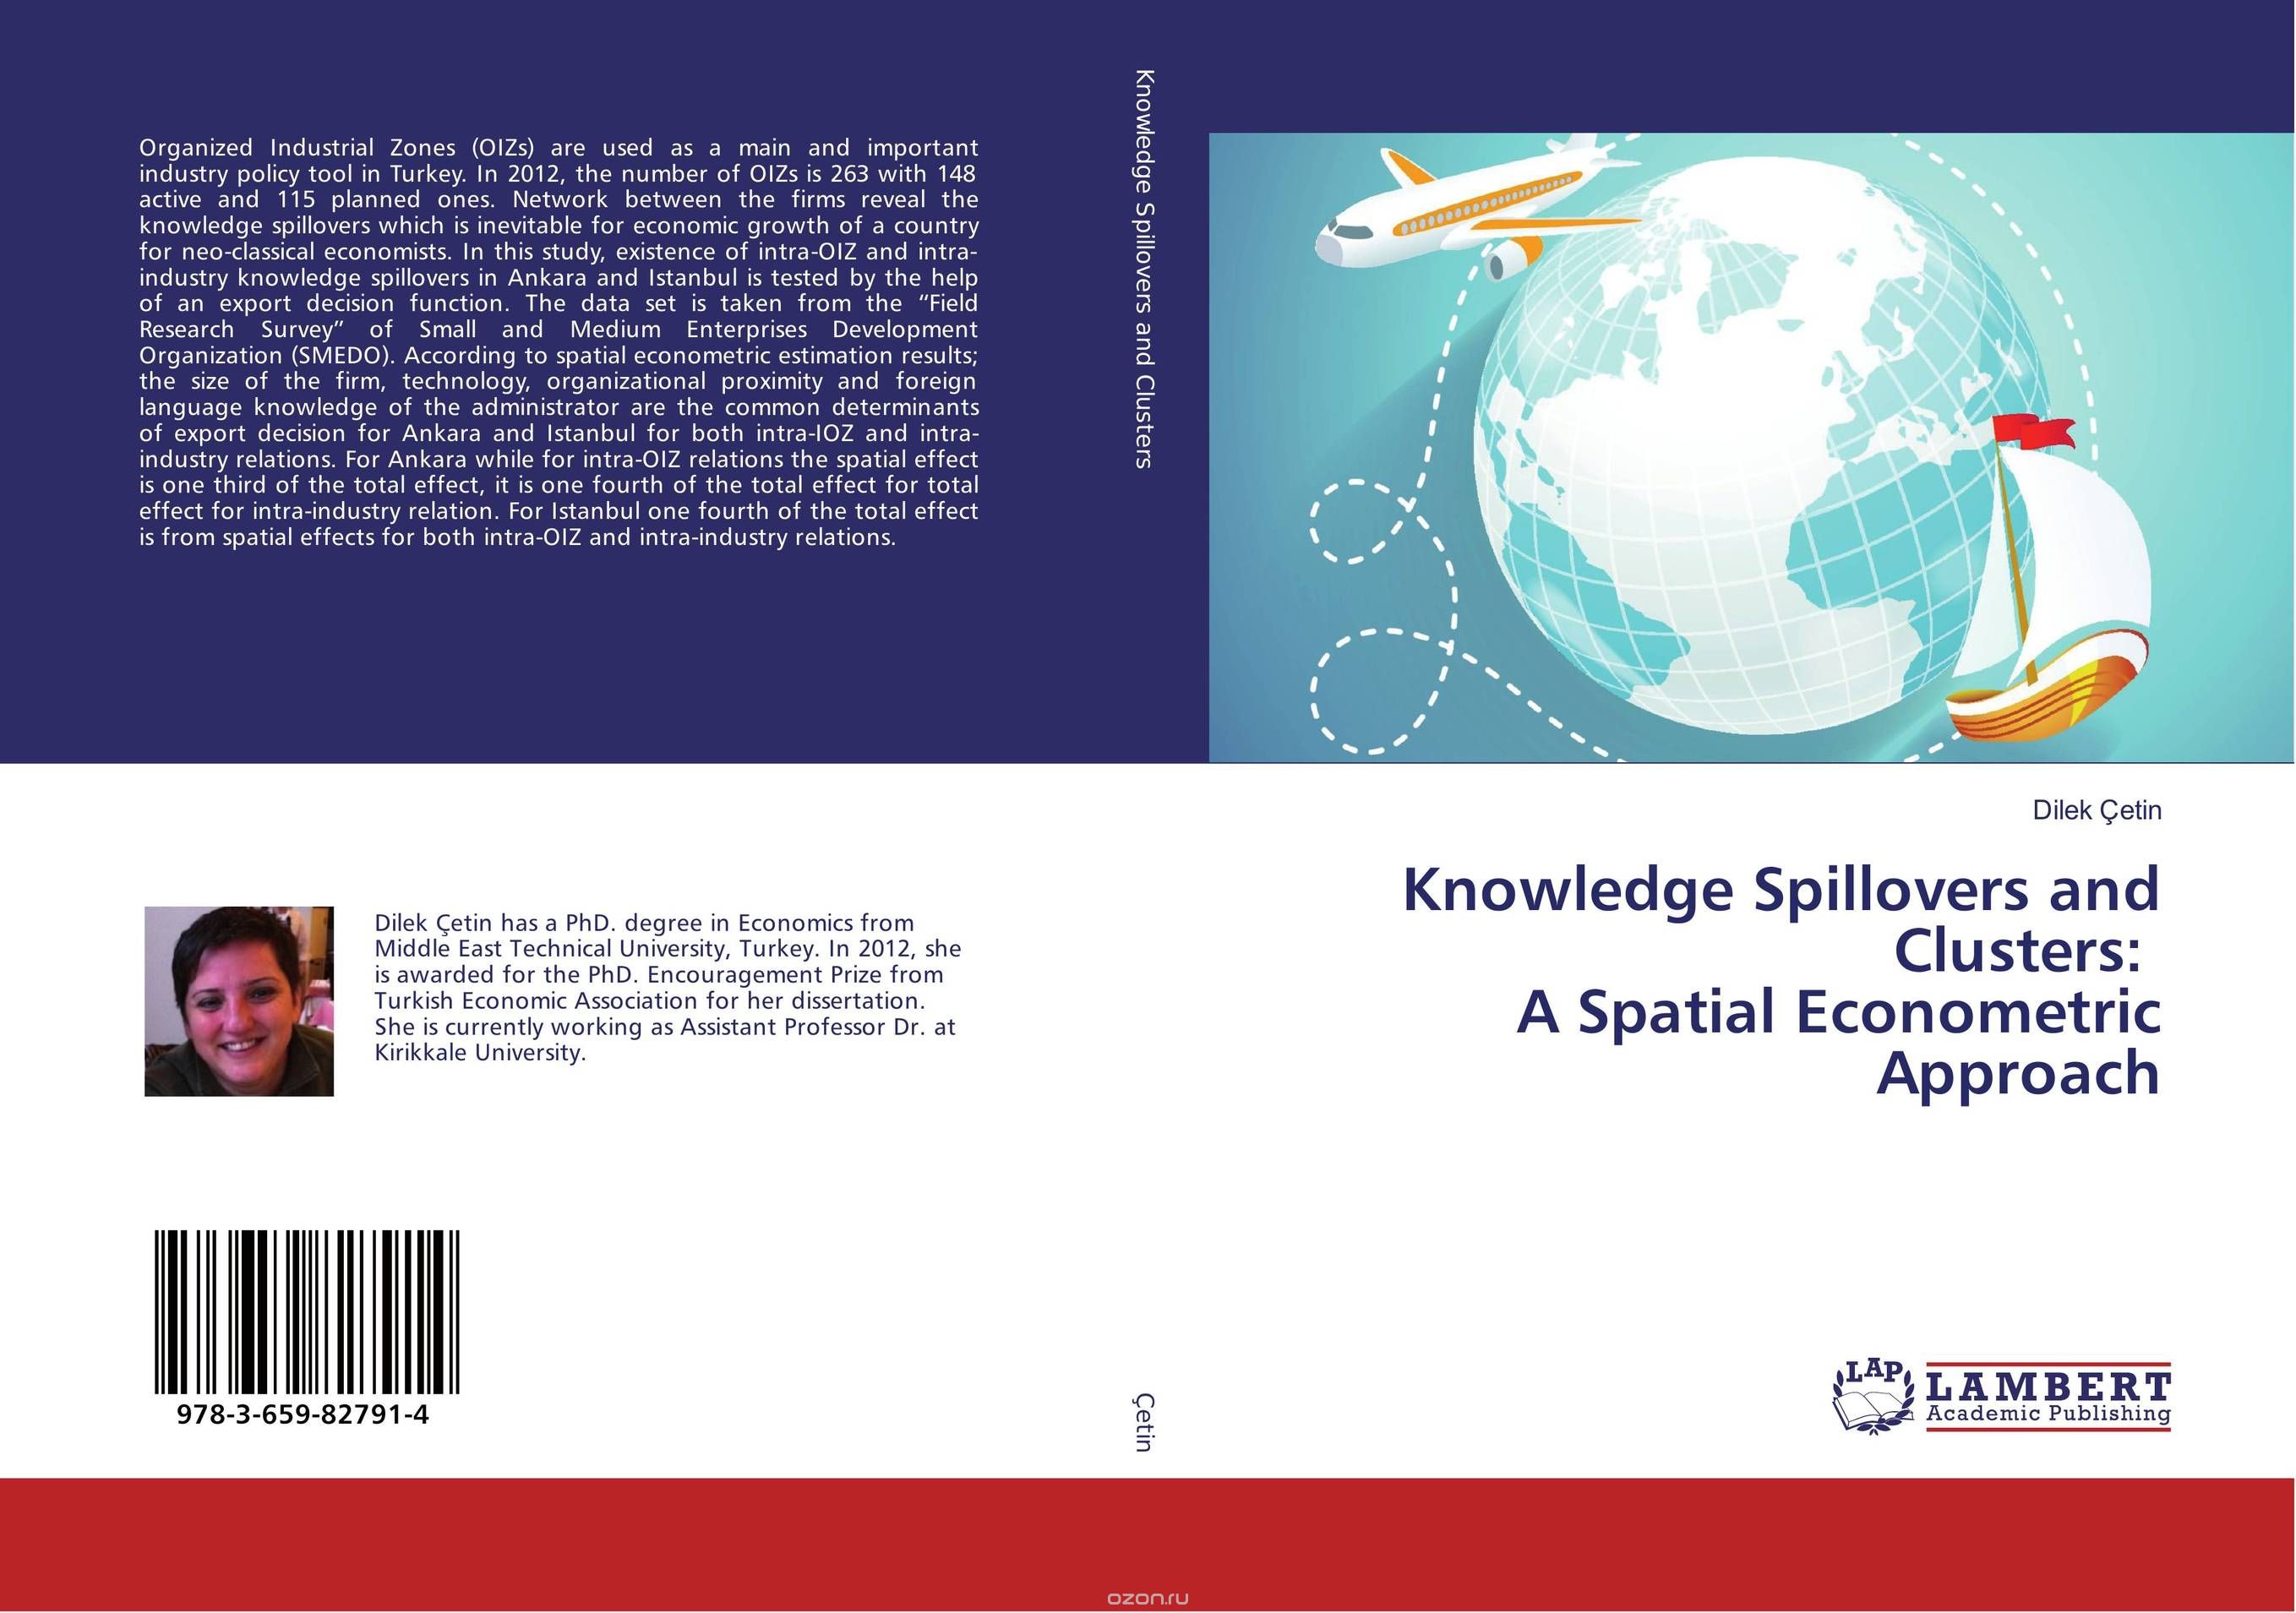 Скачать книгу "Knowledge Spillovers and Clusters: A Spatial Econometric Approach"